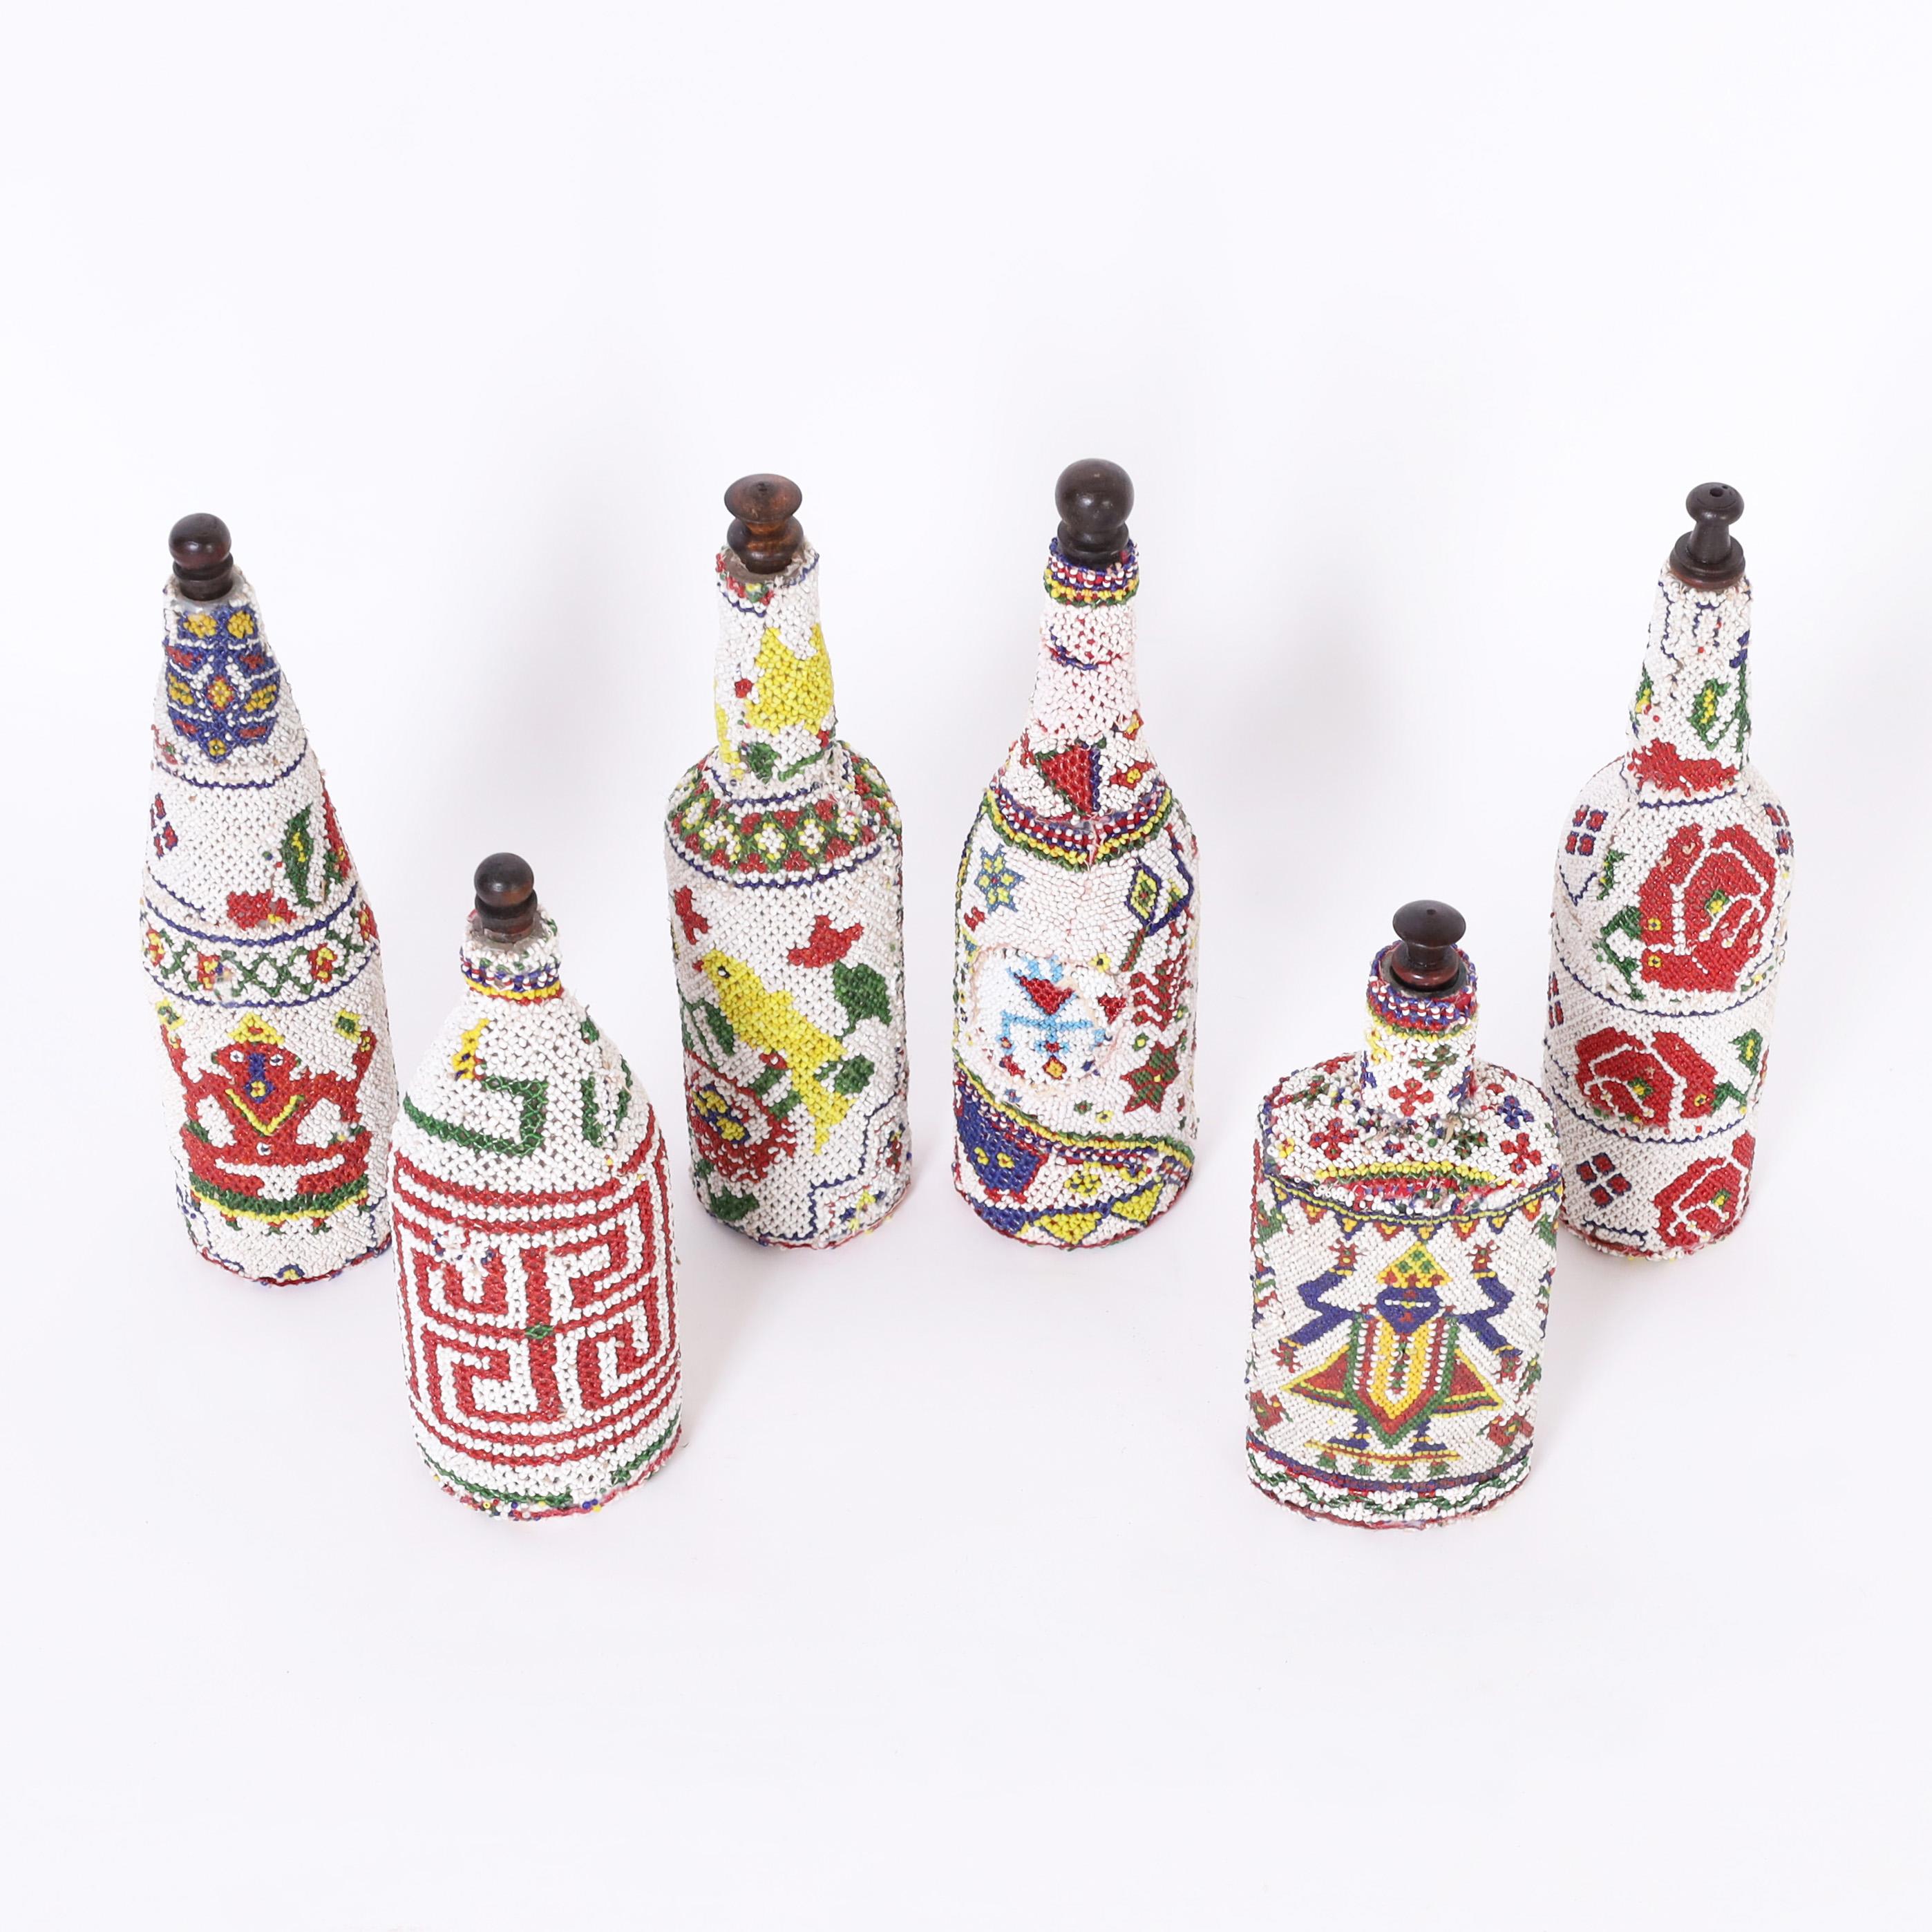 Striking group of four mid century bottles hand decorated with glass beads in bold colorful symbolic and geometric design with turned wood stoppers.

Taller Bottles: H: 13 DM: 3.5 $1,175.00 *Two center bottles are SOLD
Smaller Bottle on left: H: 11